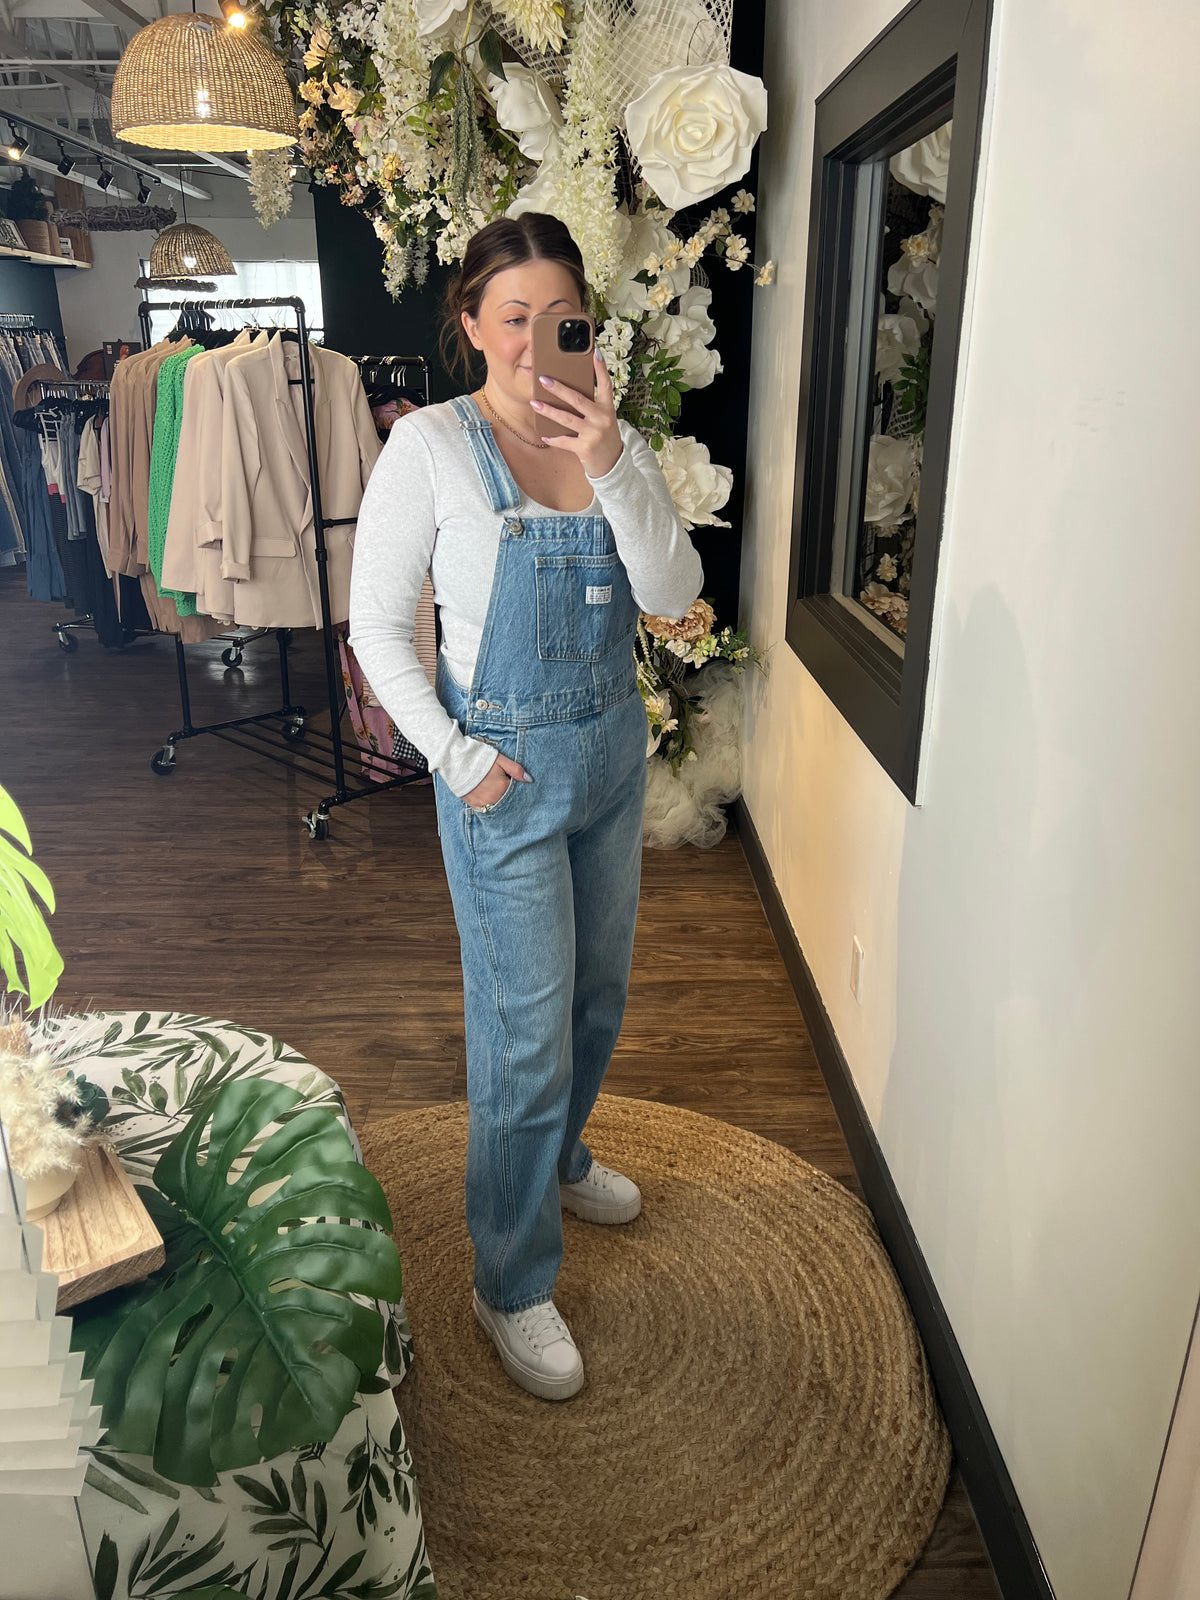 Levi's - Vintage overall